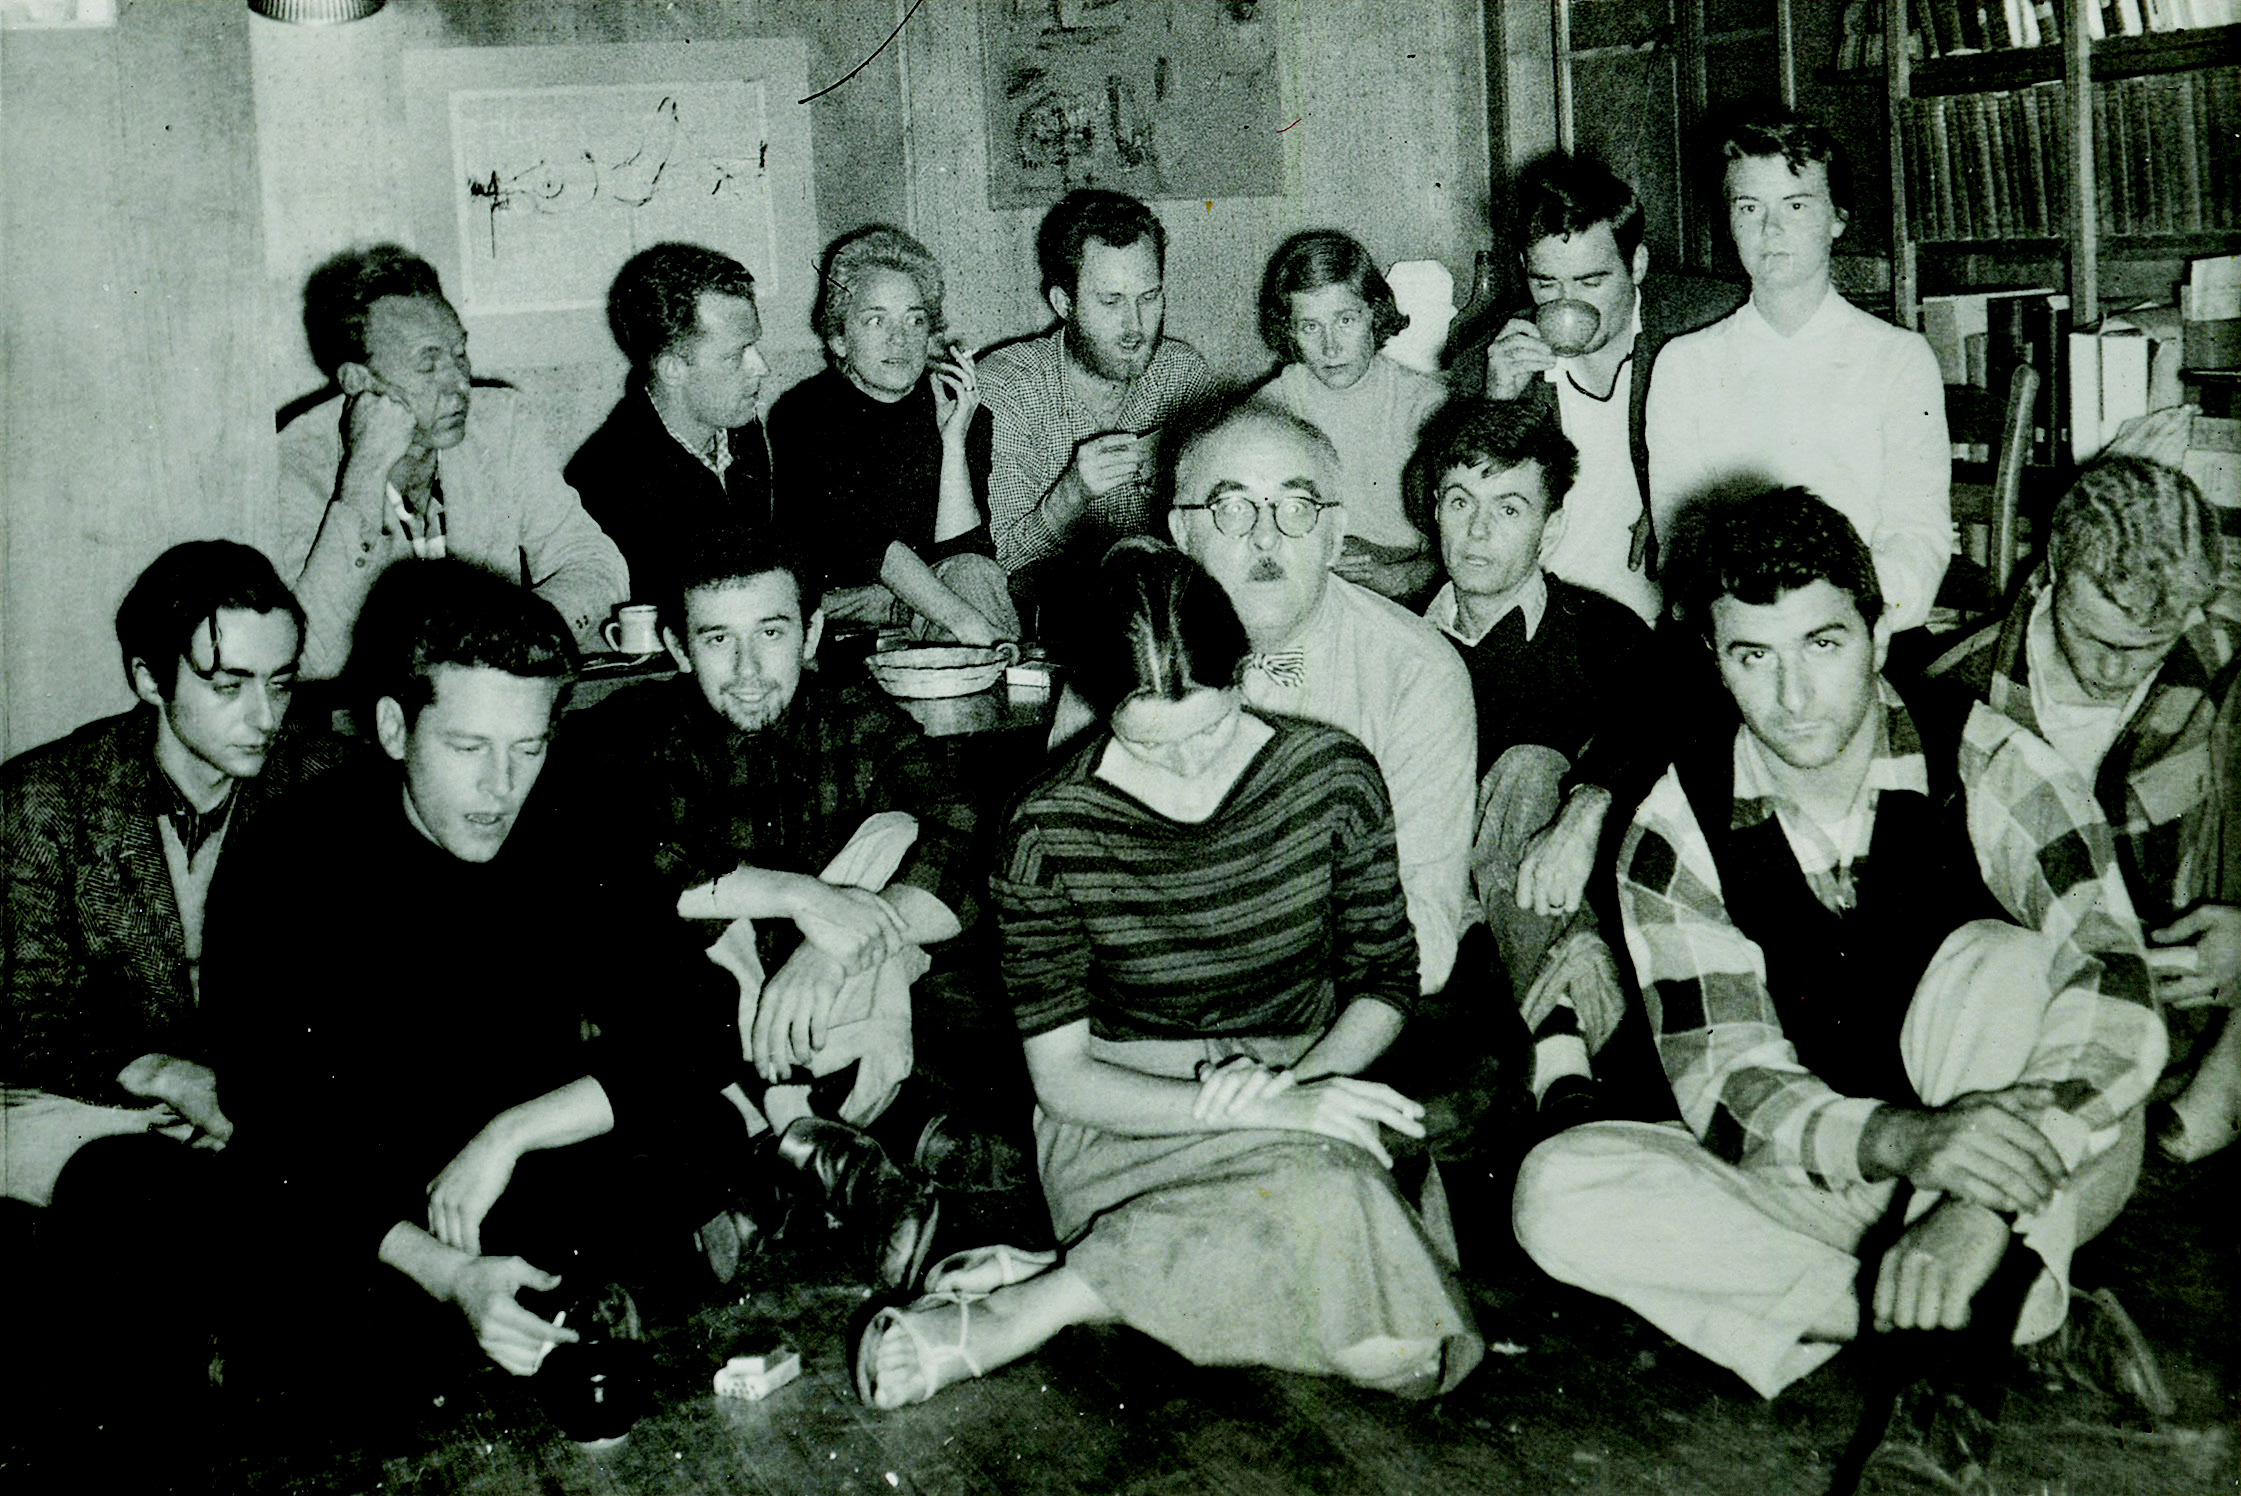 Community gathering to announce the closing of the college. Front (l to r): Eric Weinberger, Dan Rice, Basil King, Betty Olson, Charles Olson, Harvey Frauenglass, Dita Frauenglass, Joseph Fiore, Ebbe Borregaard. Back: Wesley Huss, unidentified, Eloise Mixon, Don Mixon, Ann Simone, Robert Hawley, unidentified. Photographer Unknown.